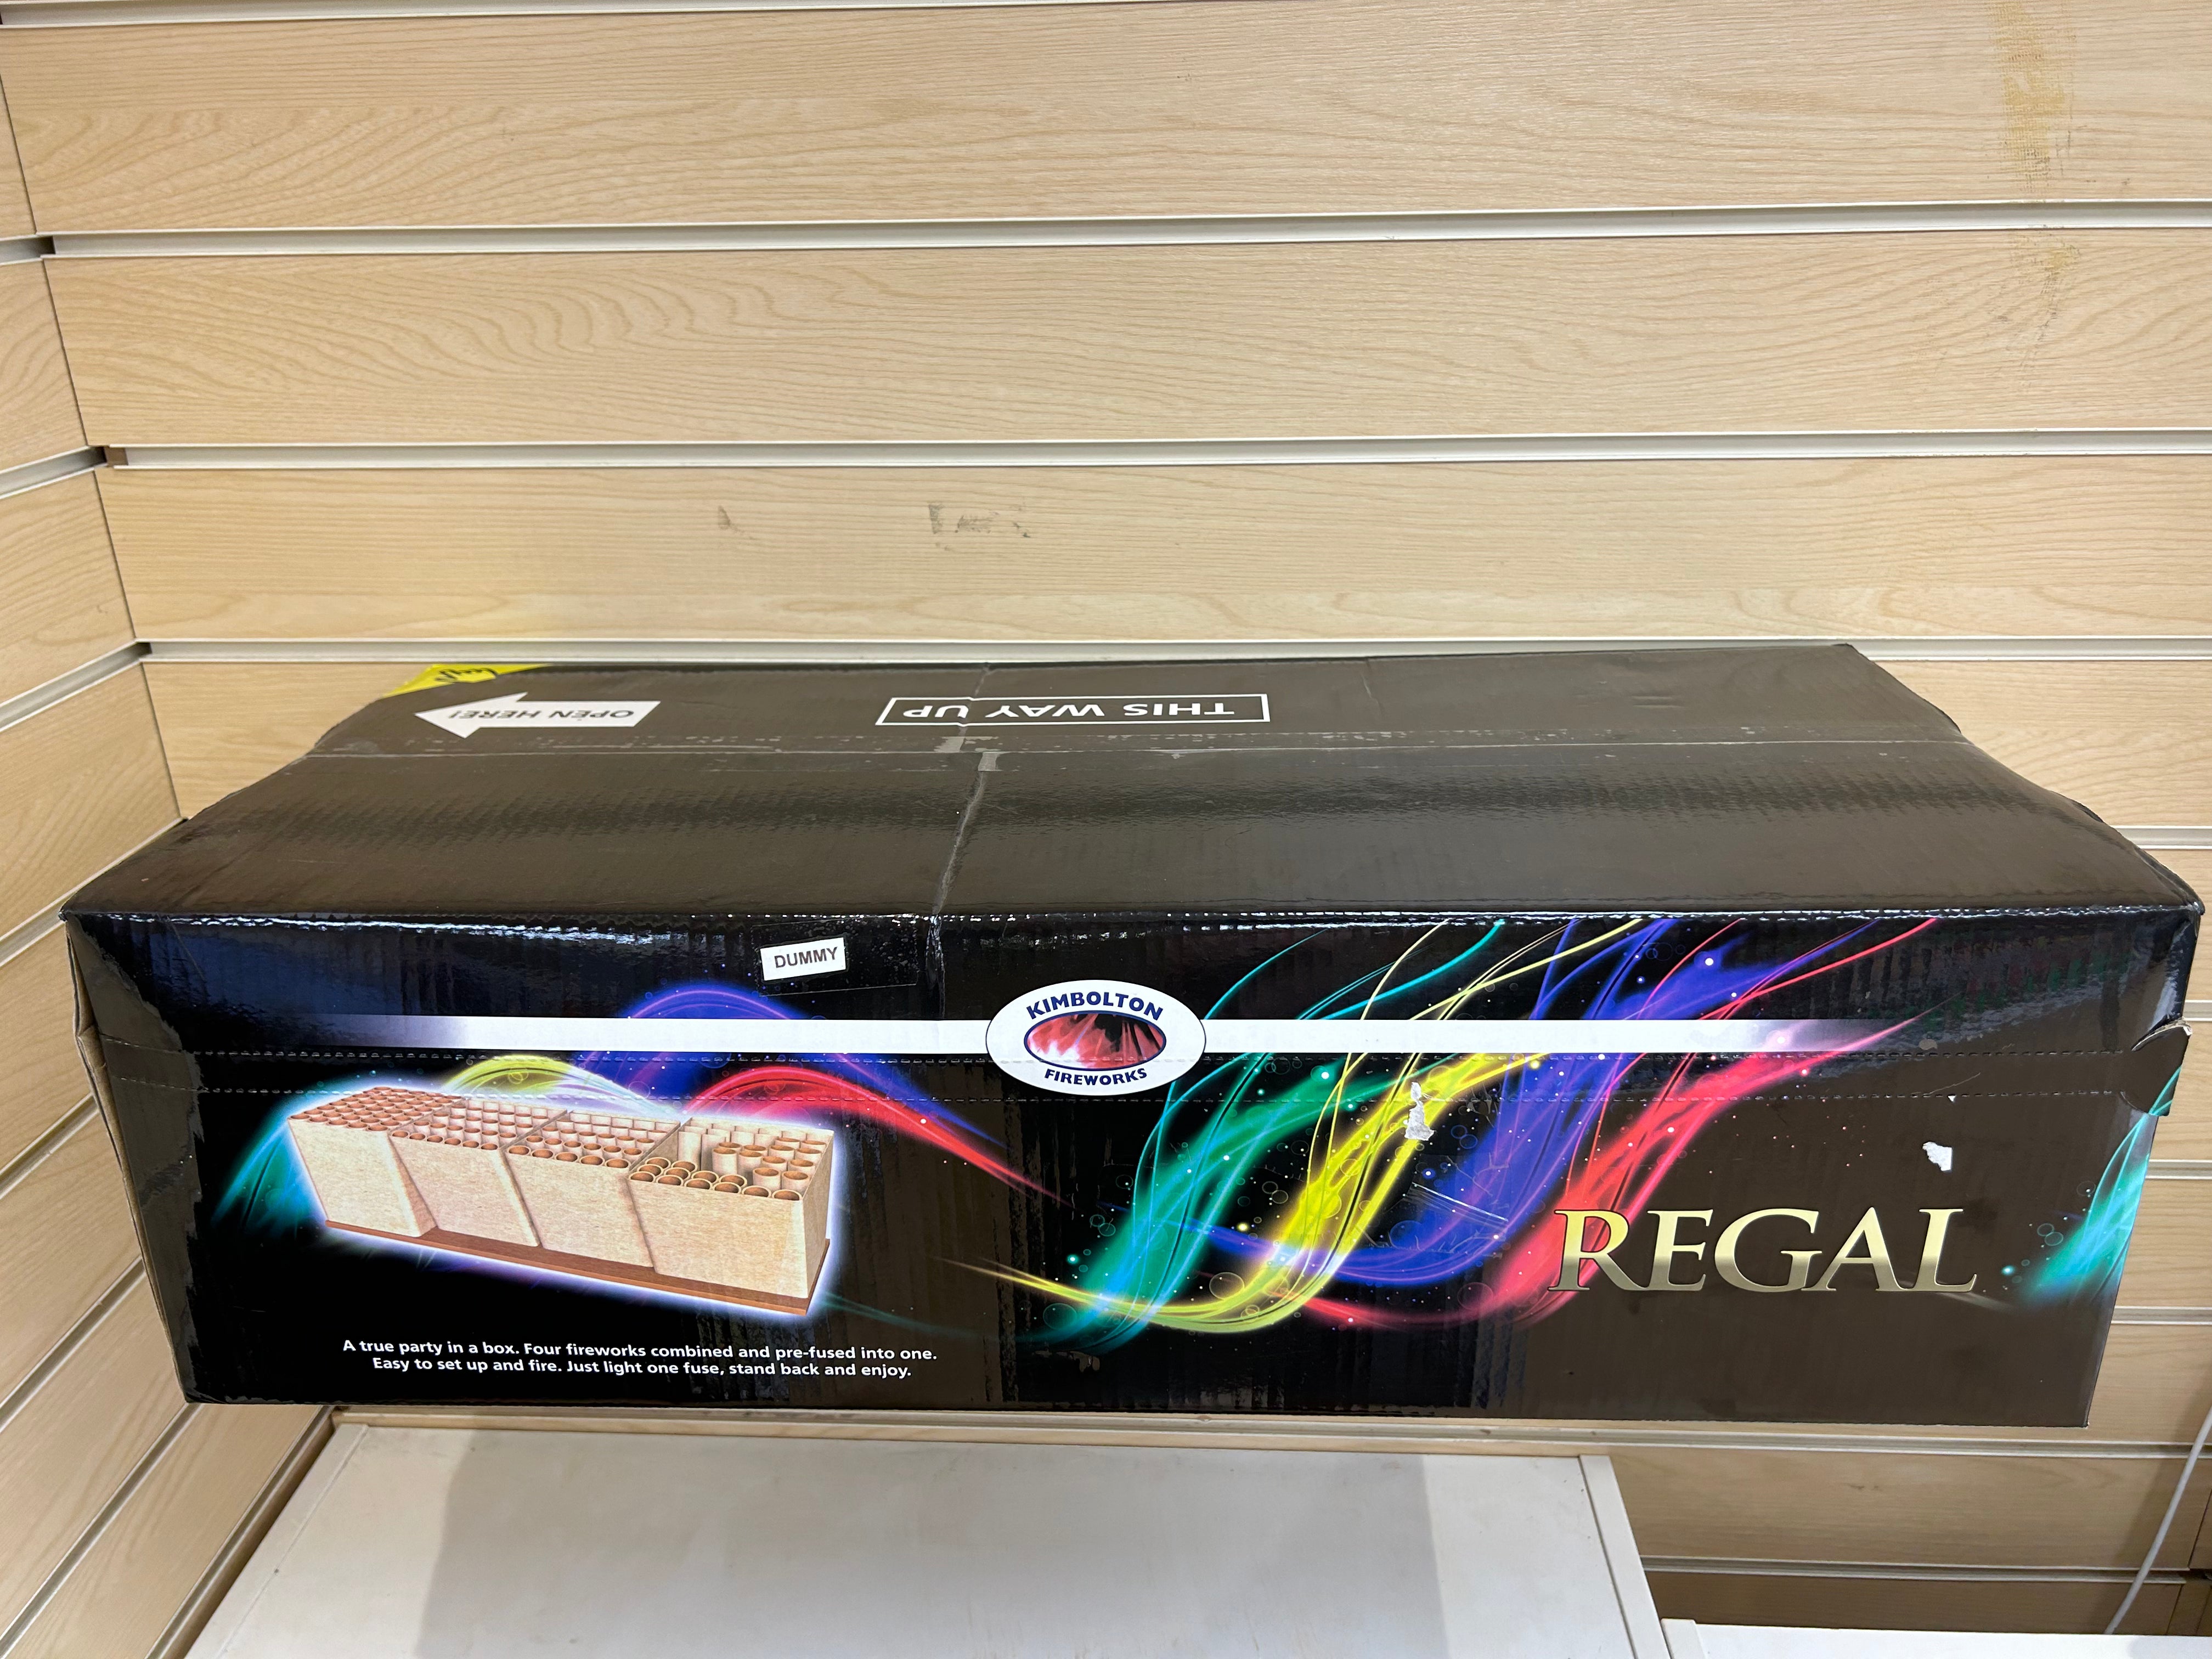 Regal , Massive Fireworks!! WOW WOW WOW !!! Insane price for this !!!